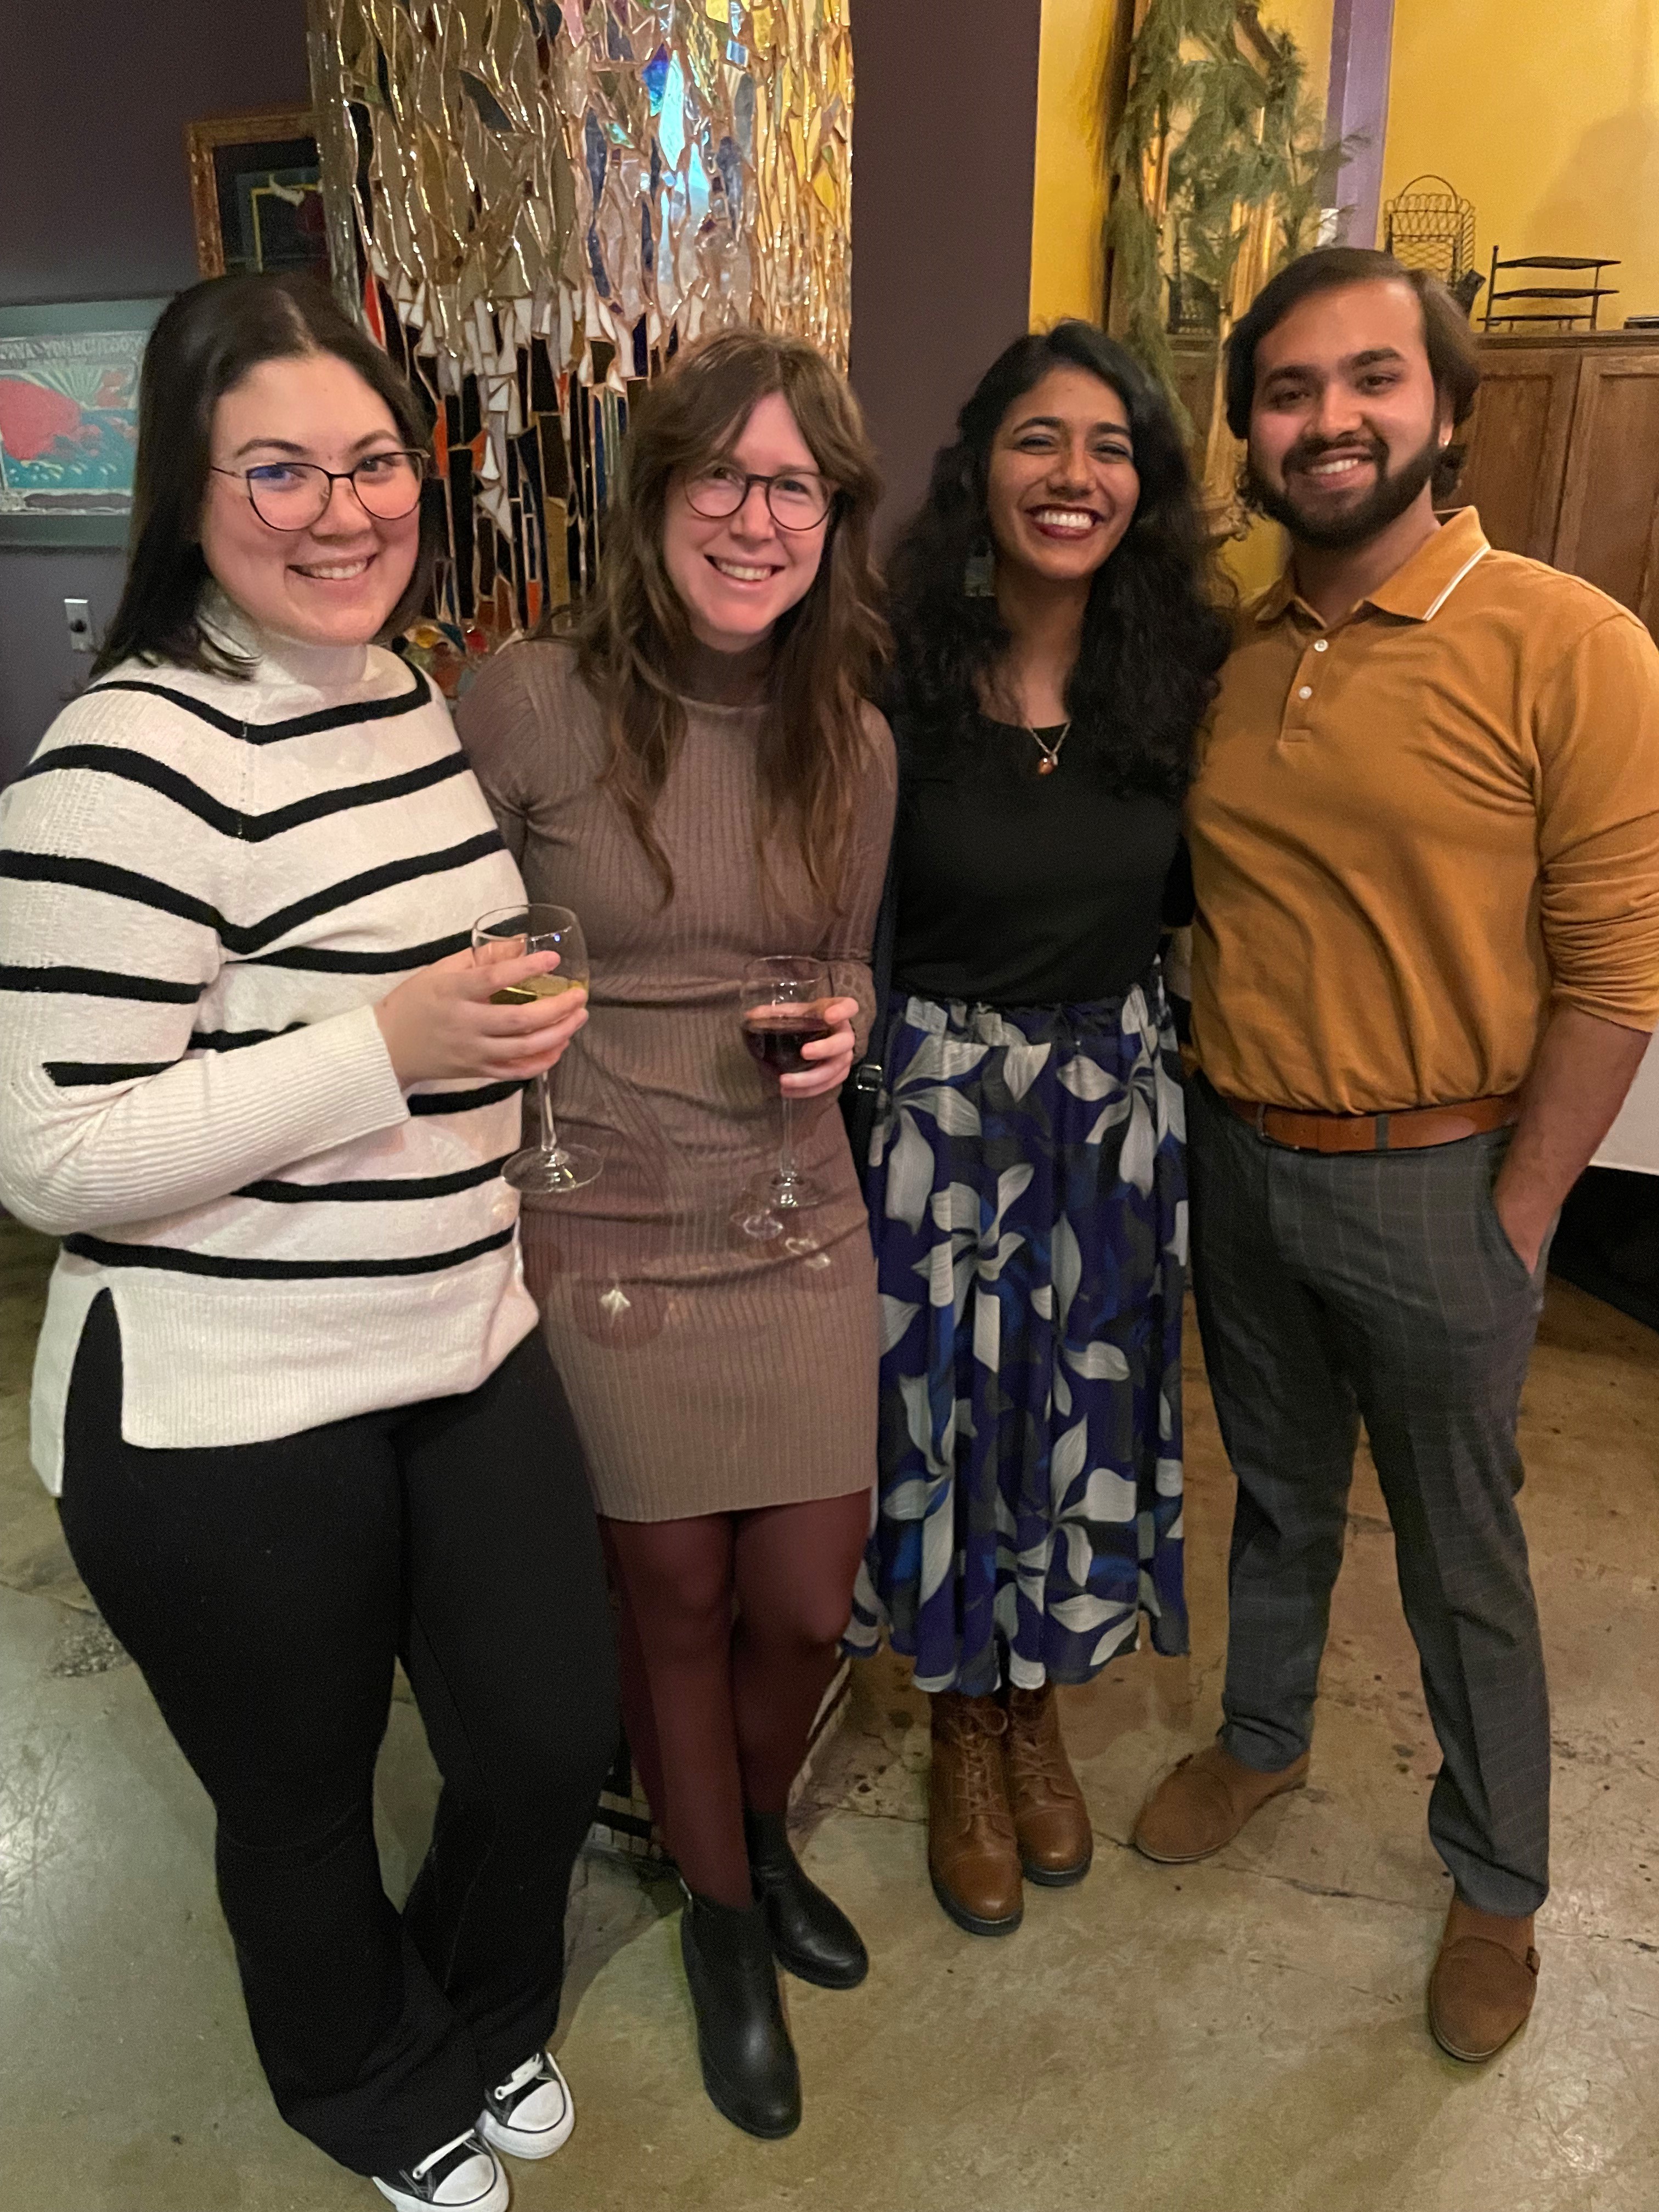 The MIMH AddSci team and ASPIRE Lab celebrated the end of a great year and semester with a Holiday Party!